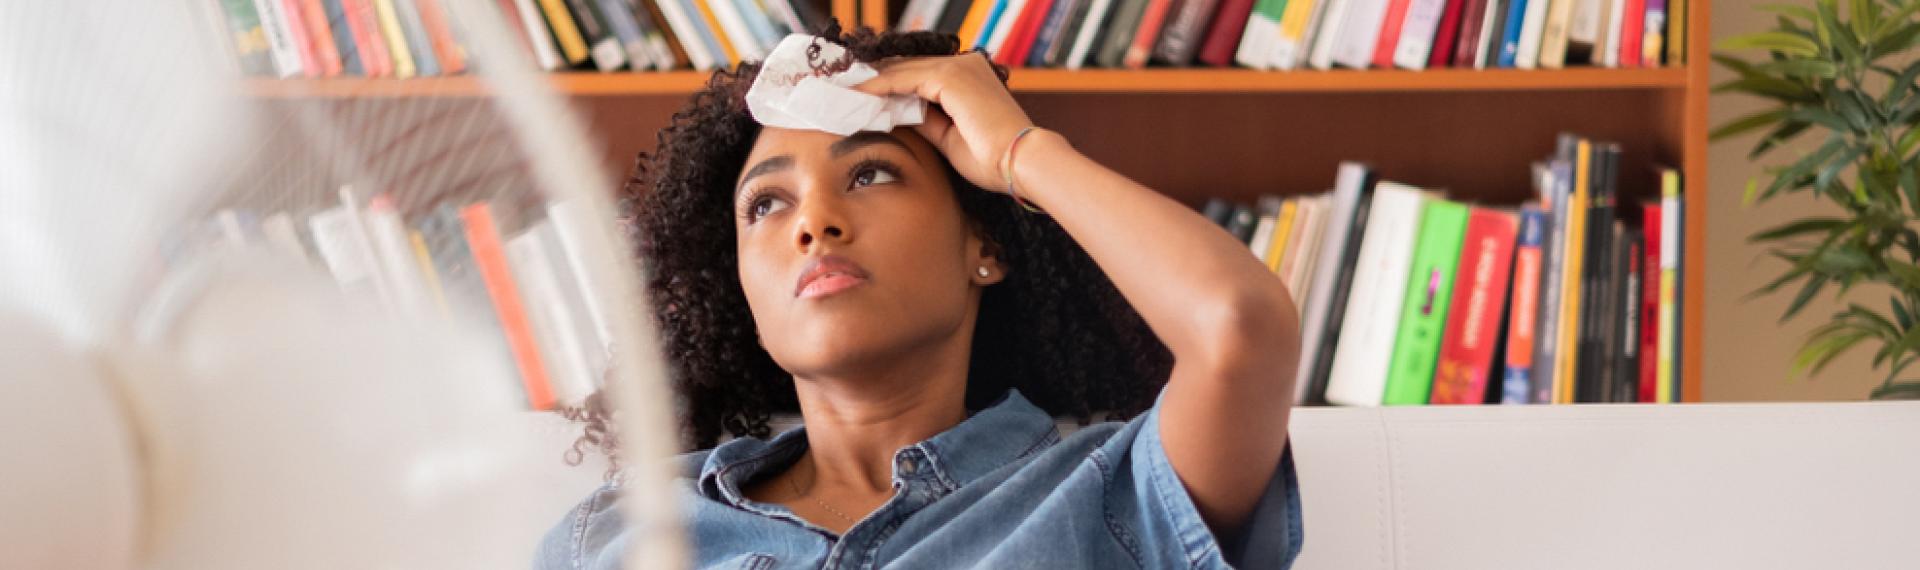 Woman Warm In Room Sitting In Front Of Fan Holding Cold Wash Cloth On Her Forehead